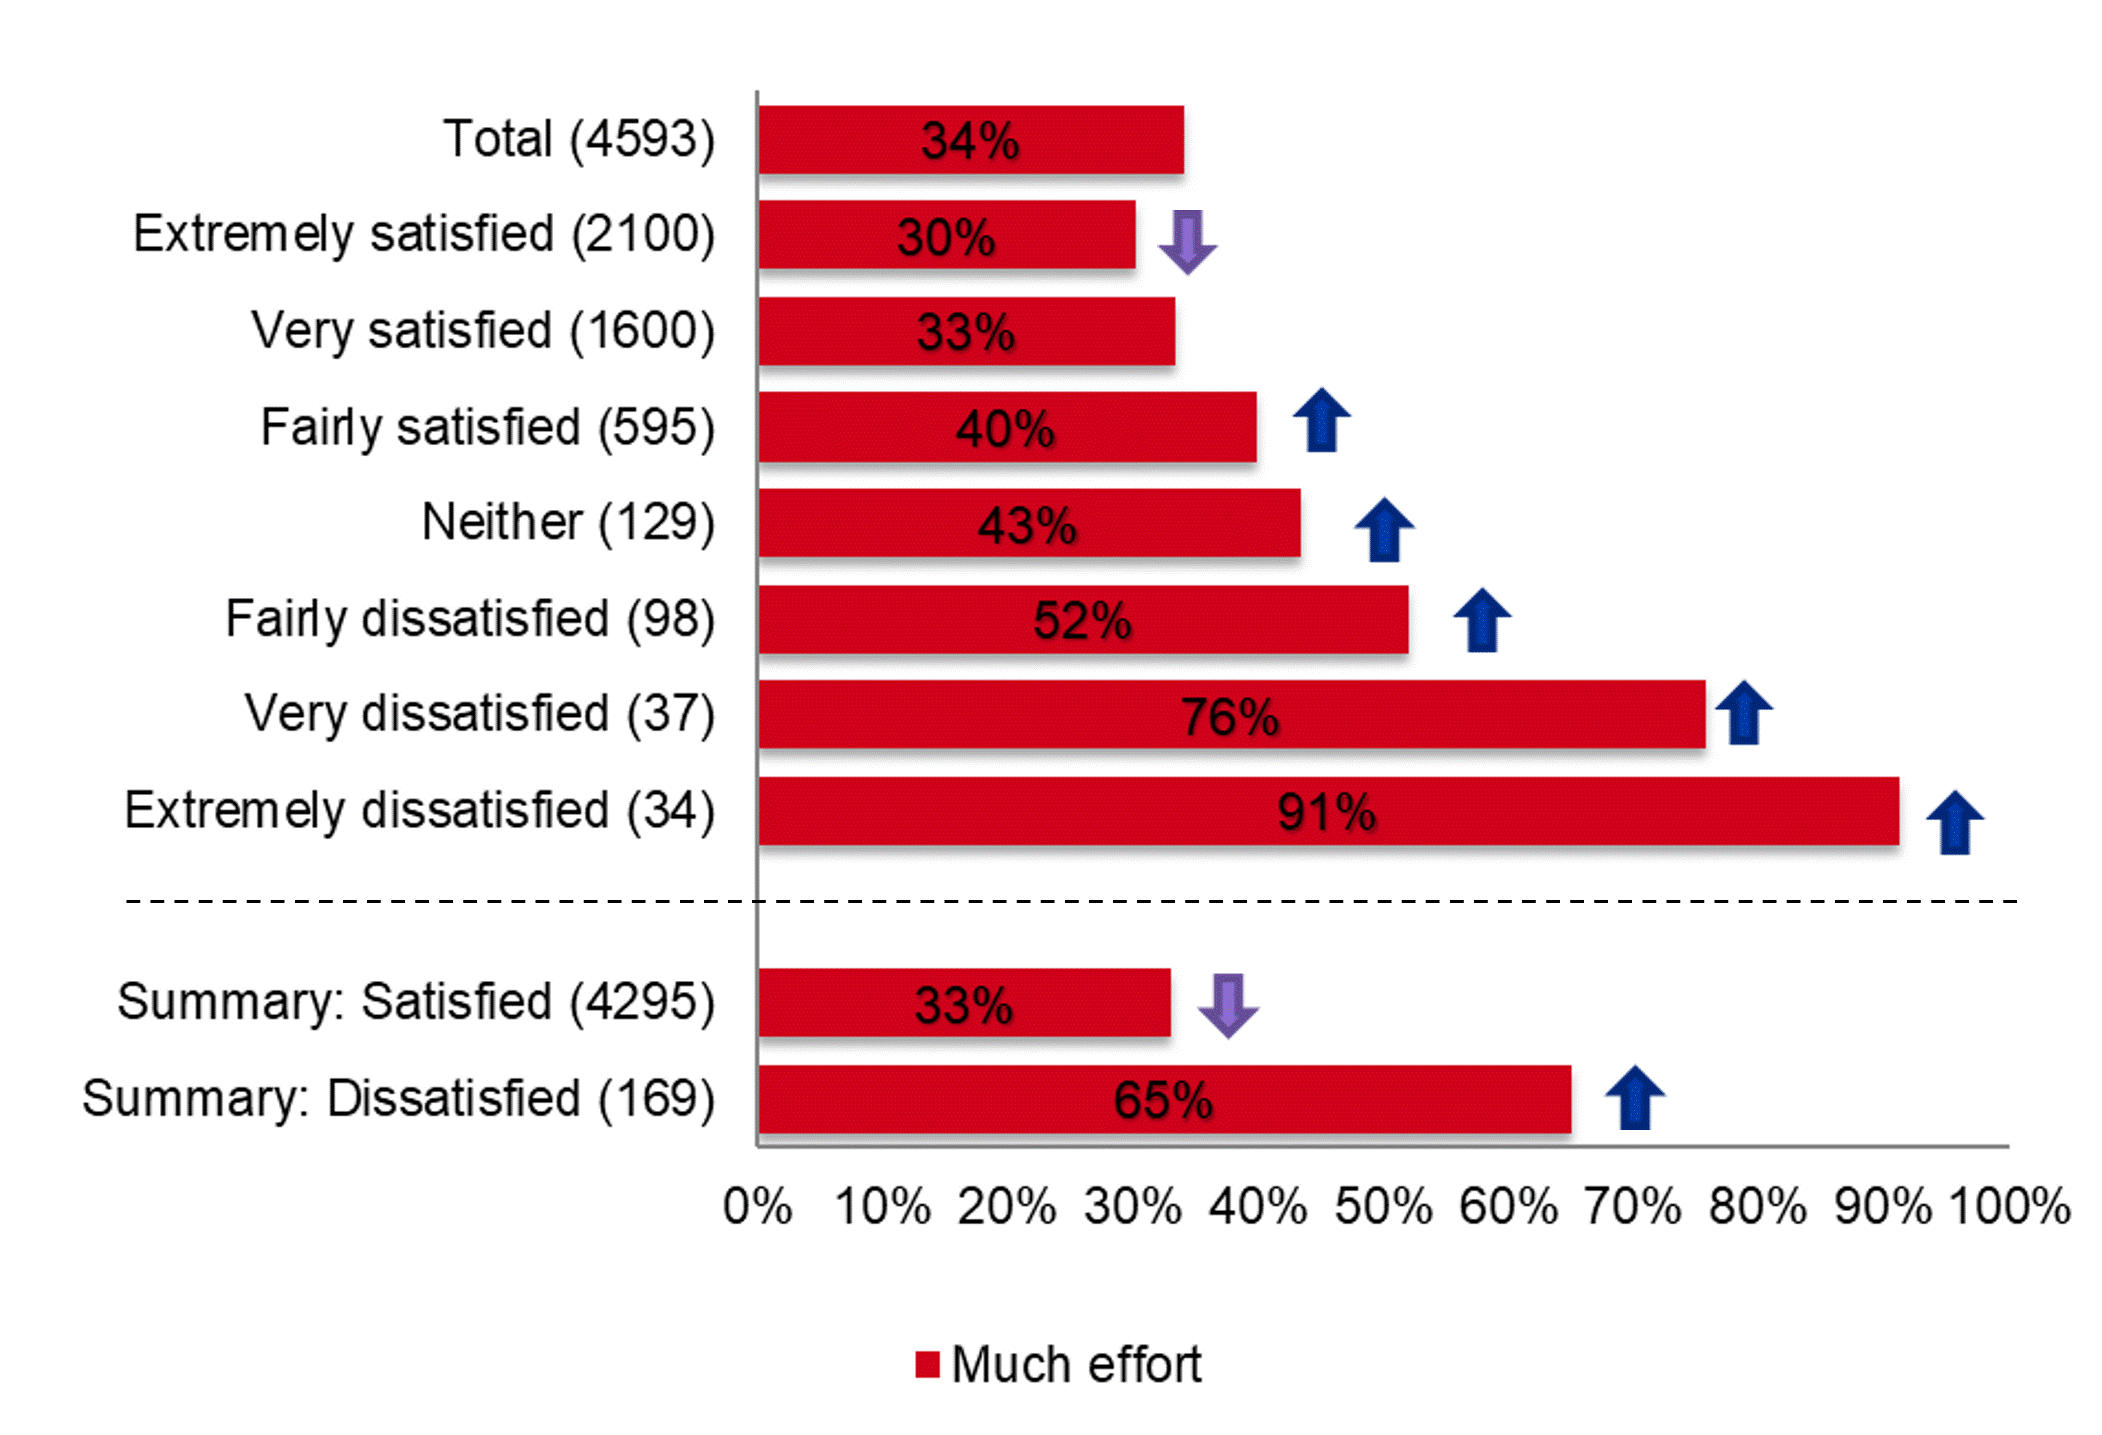 Bar chart showing the relationship between those who felt they went to much effort to get their query resolved and levels of overall satisfaction with the Acas helpline service. More information is in the previous text.